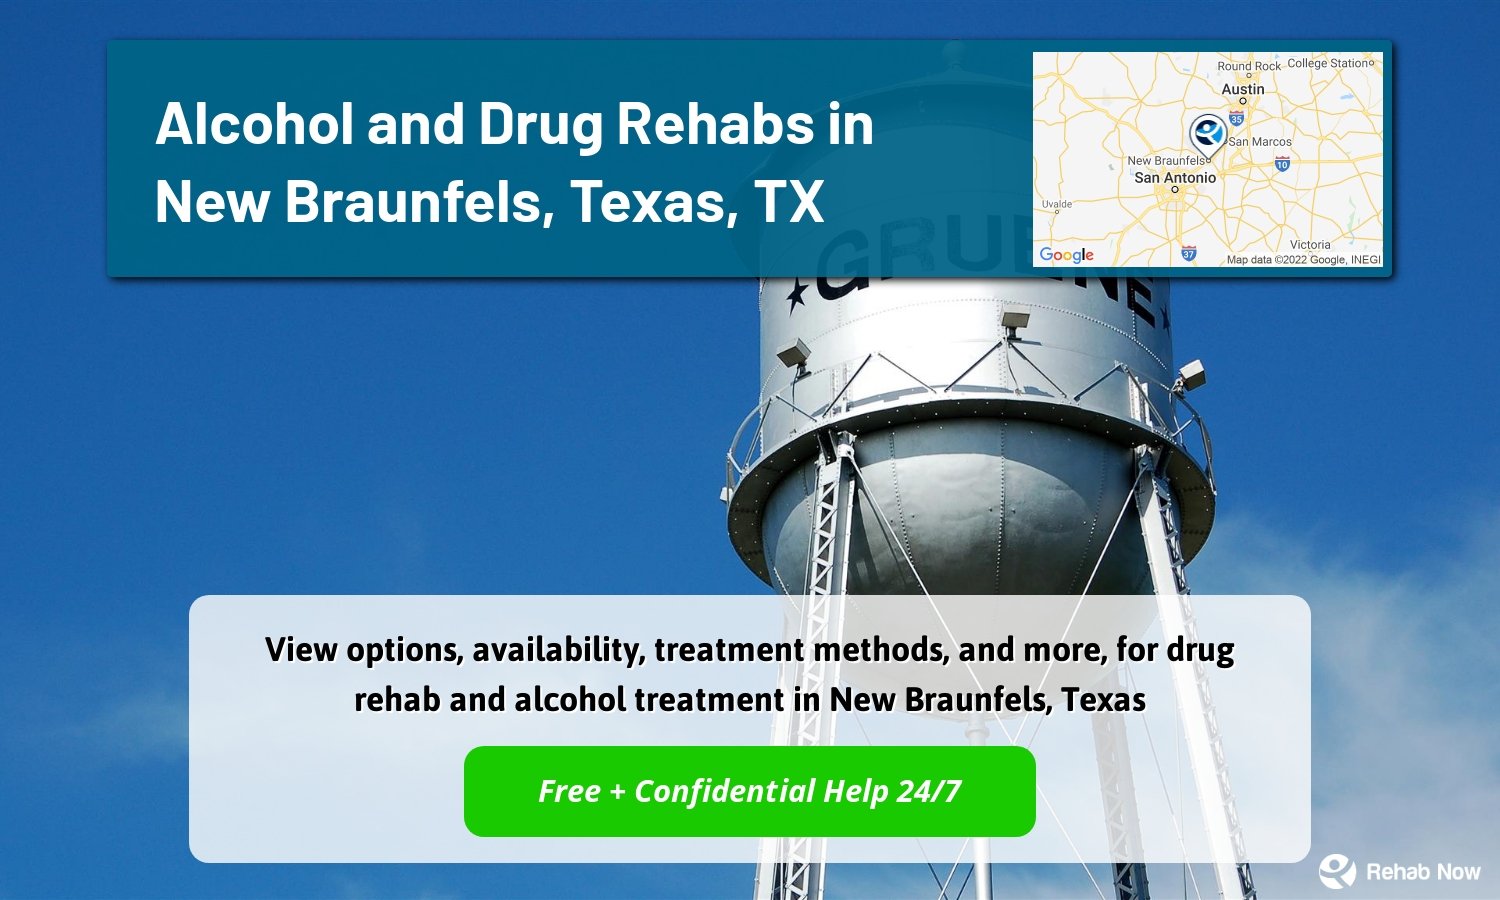 View options, availability, treatment methods, and more, for drug rehab and alcohol treatment in New Braunfels, Texas